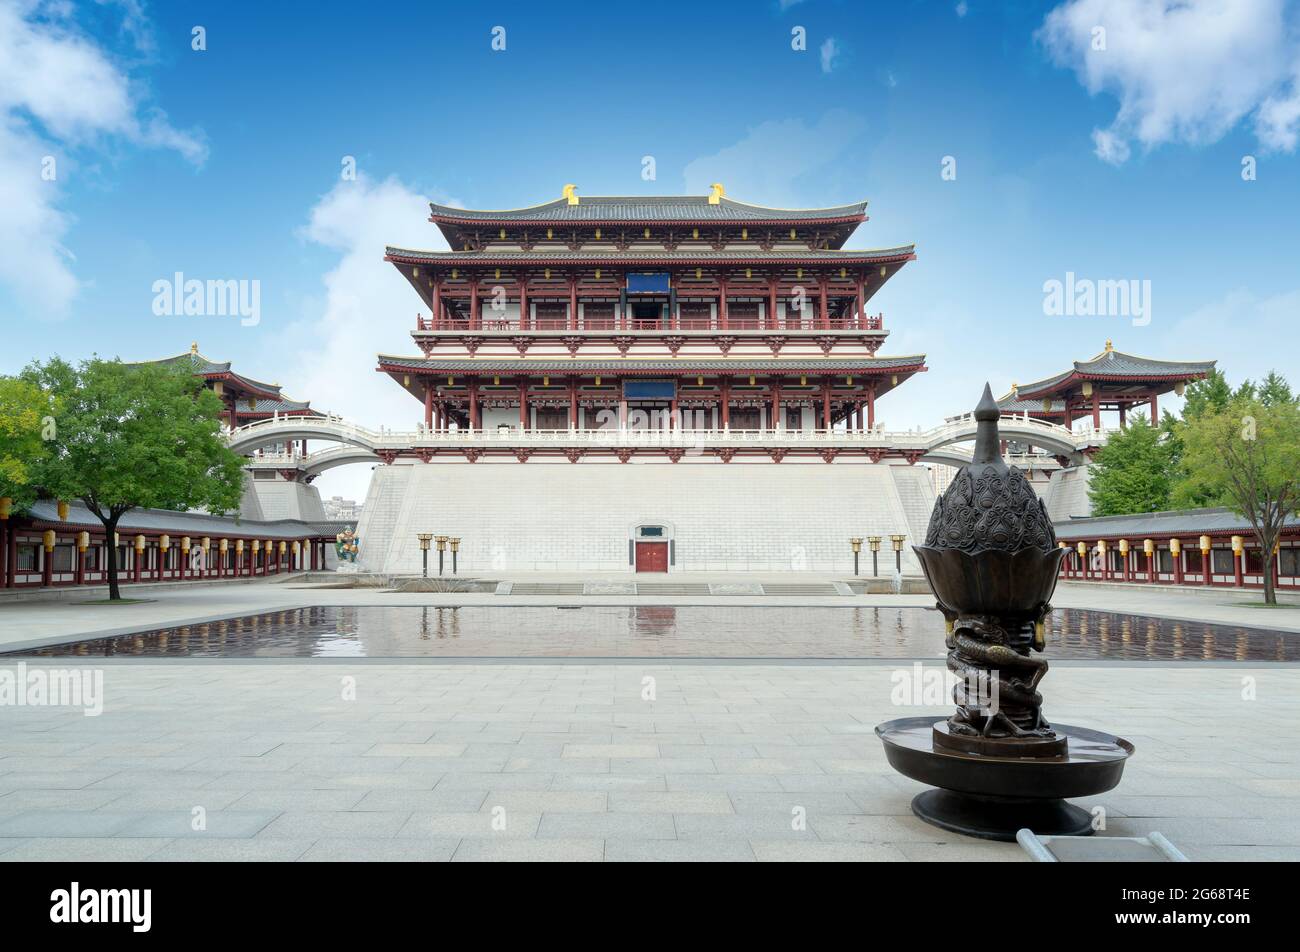 The Ziyun Tower was built in 727 AD and is the main building of the Datang Furong Garden, Xi'an, China.Translation:'Datang Furong Garden' Stock Photo